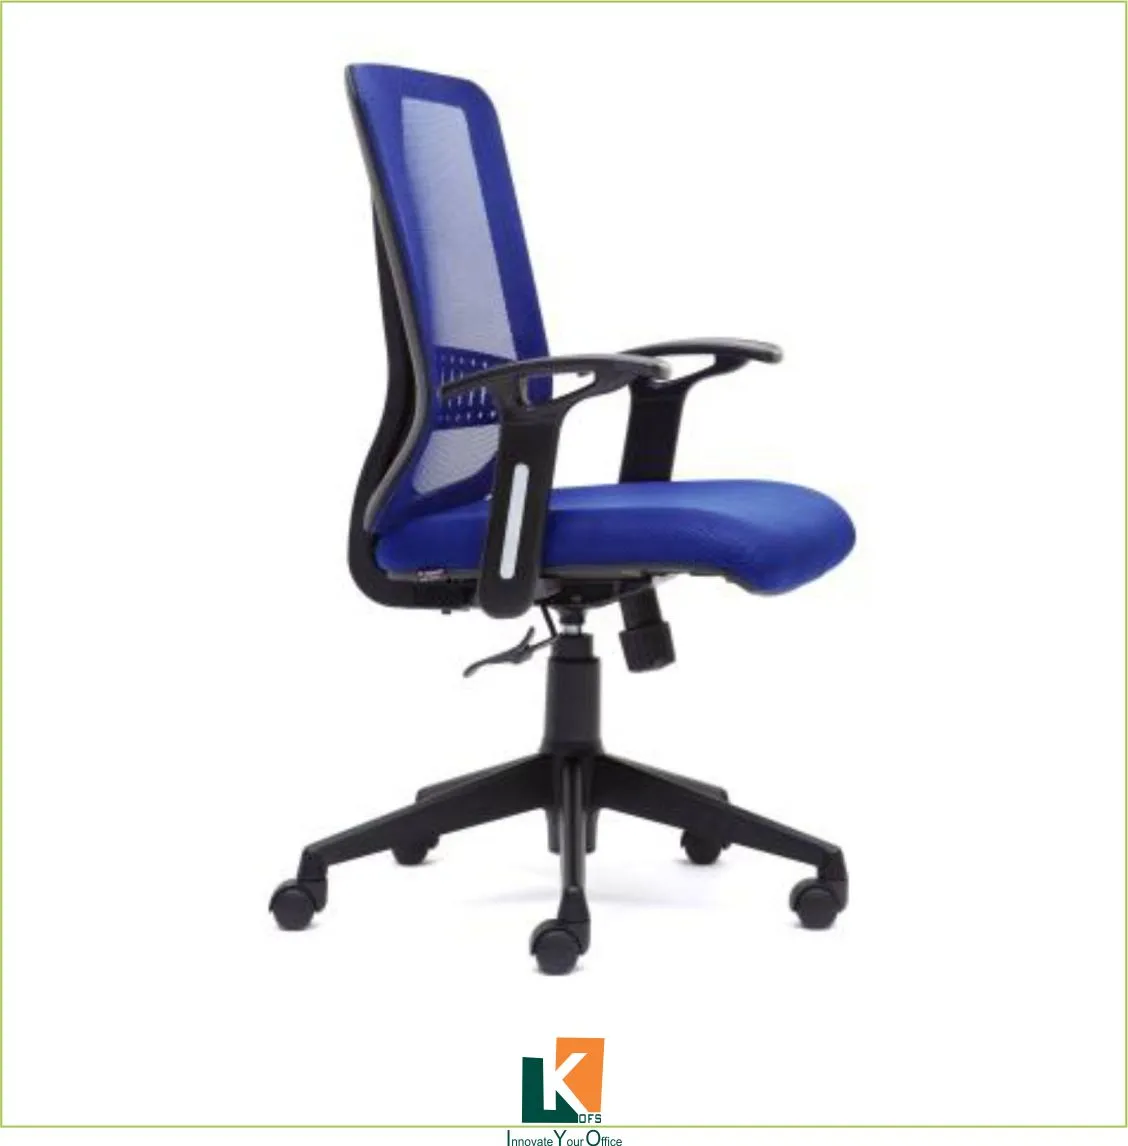 Low Back workstation chair